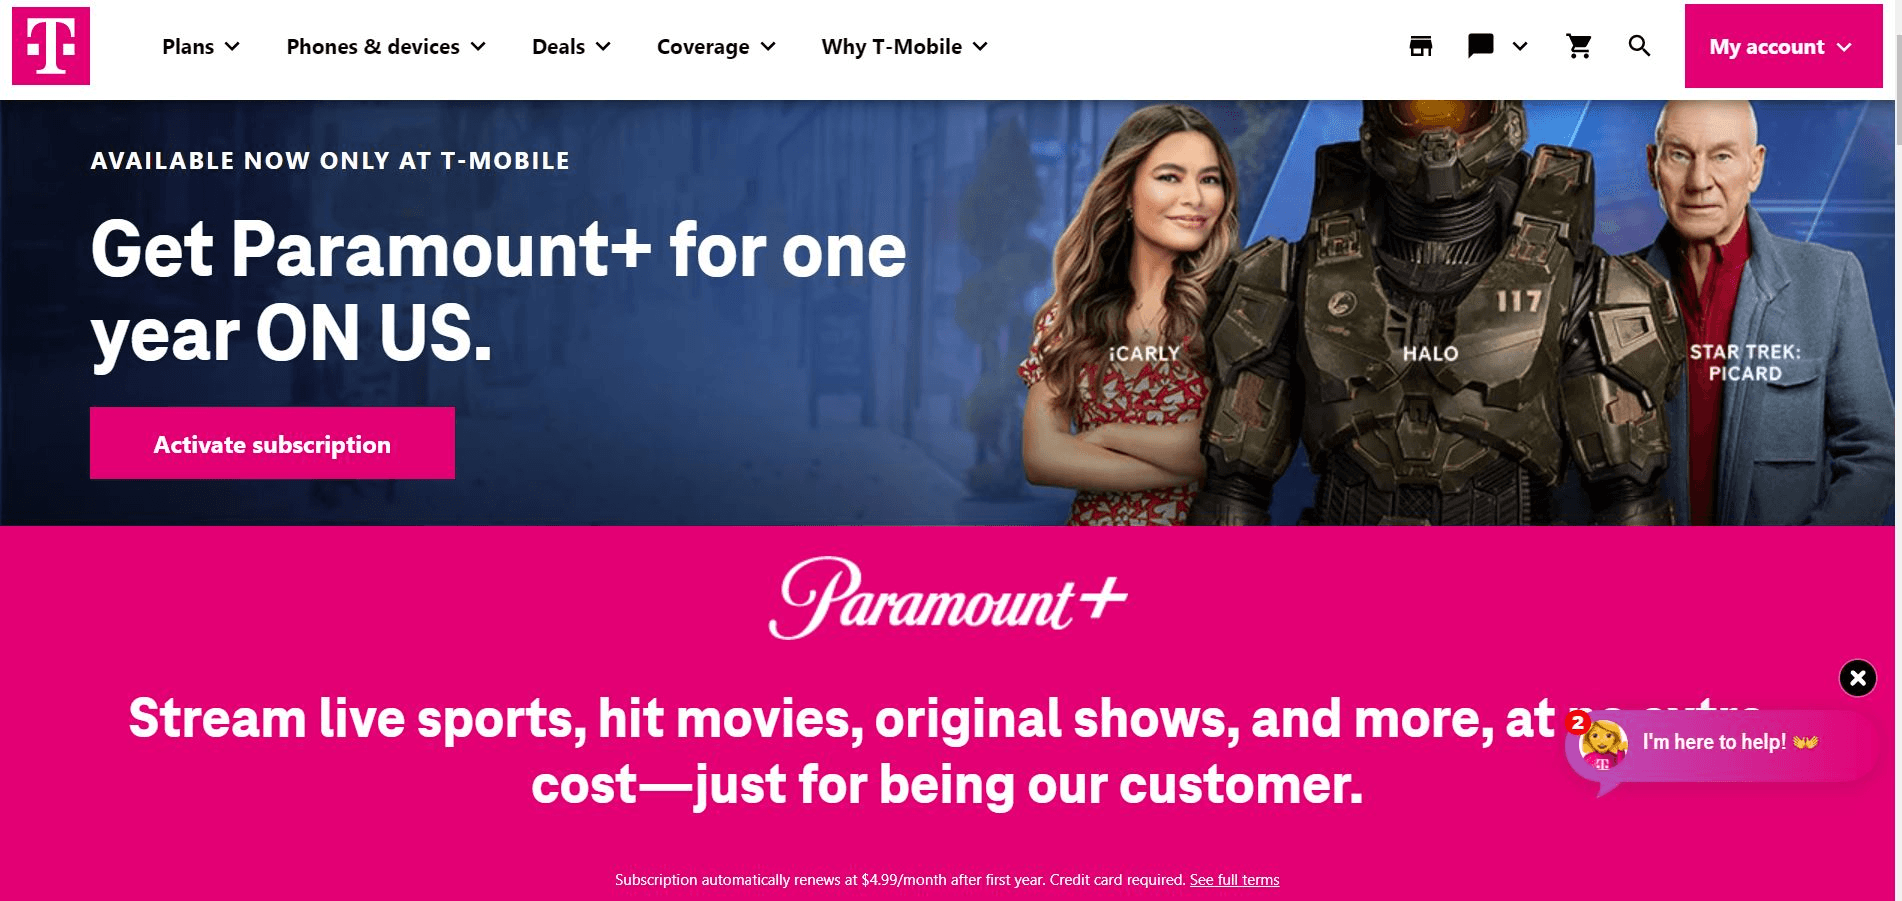 Get a years free Paramount+ with T-mobile. 